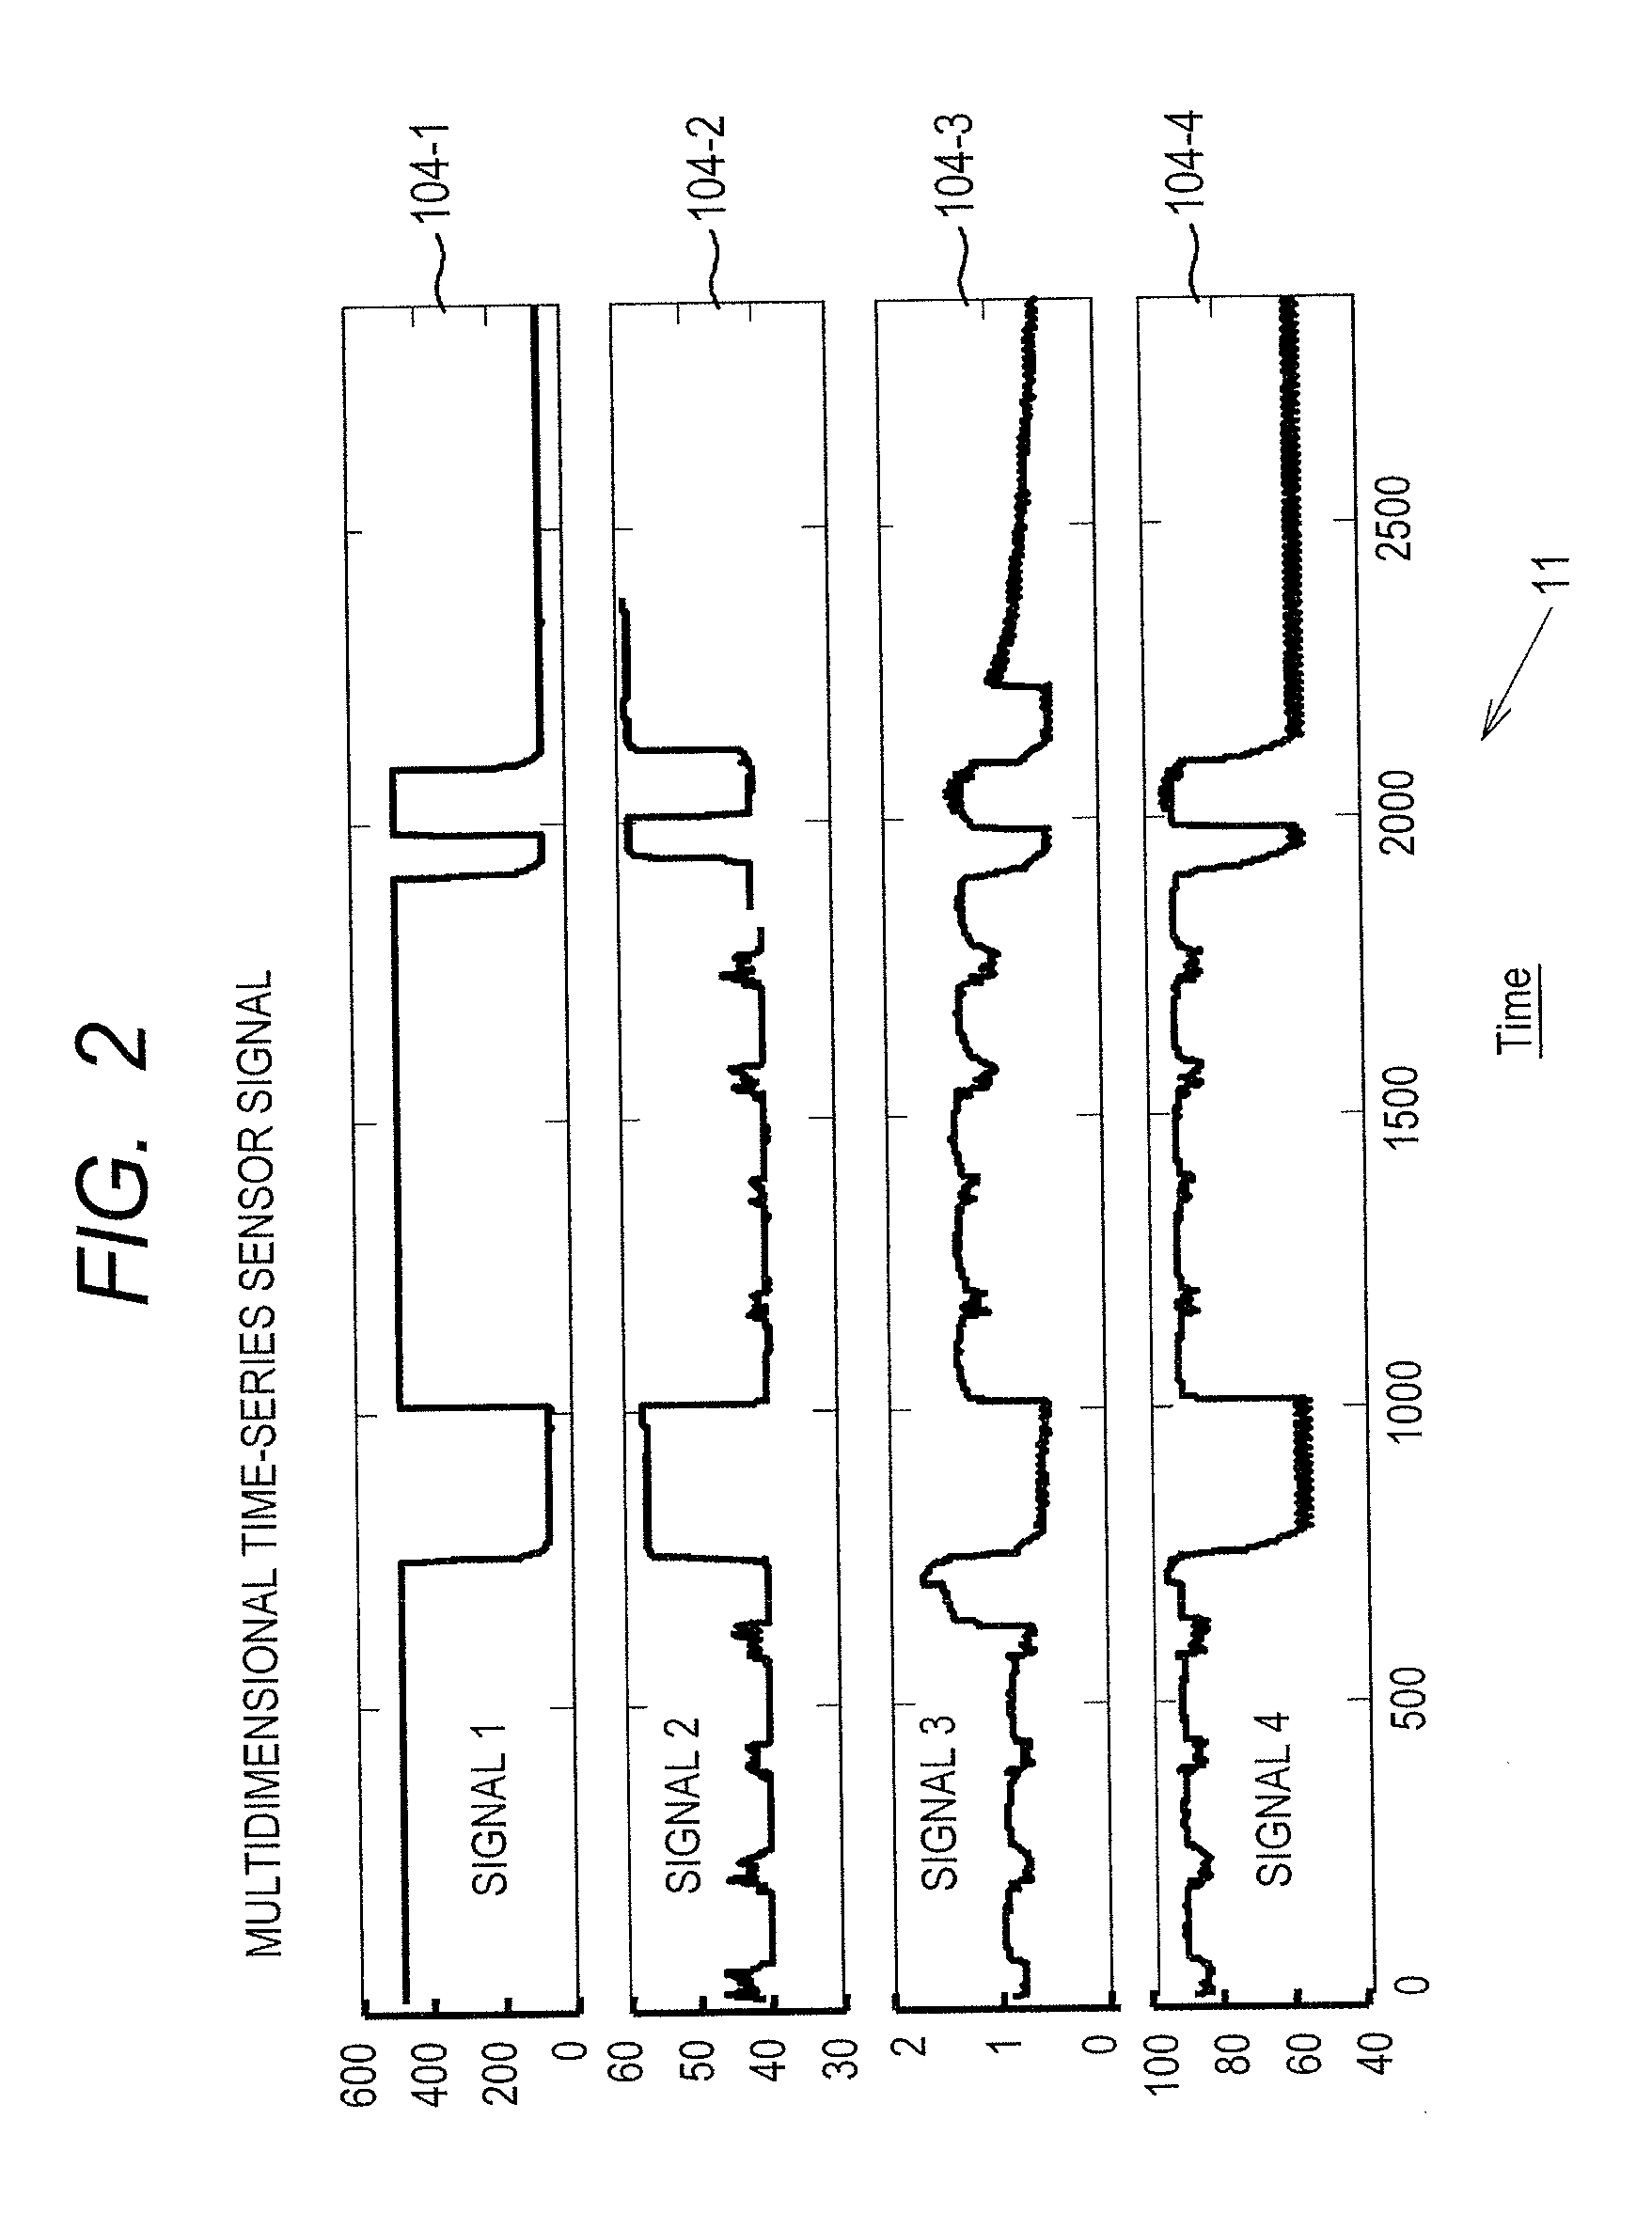 Malfunction Detection Method and System Thereof